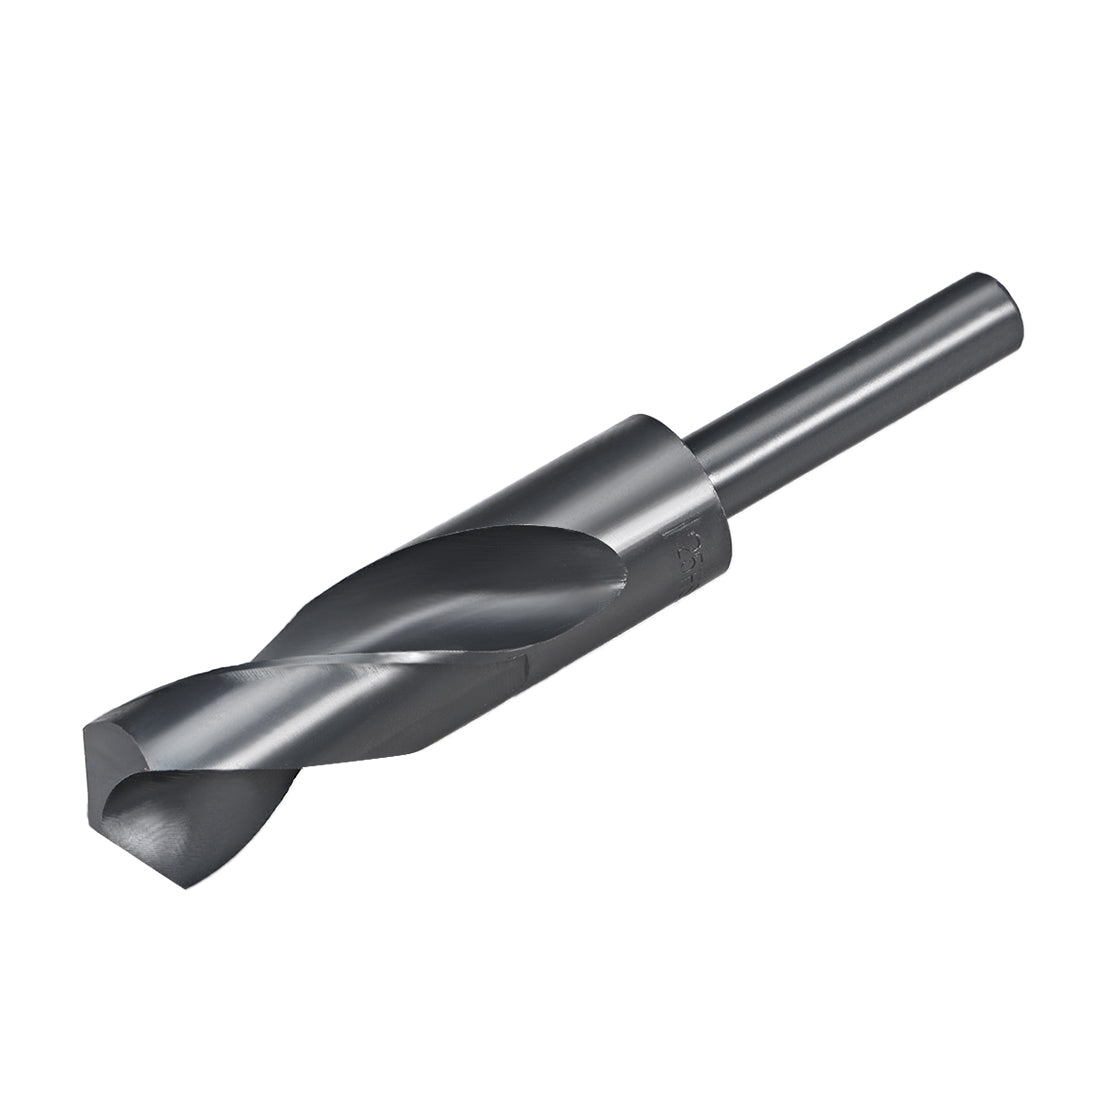 uxcell Uxcell Reduced Shank Drill Bit 25mm HSS 6542 Black Oxide with 1/2 Inch Straight Shank